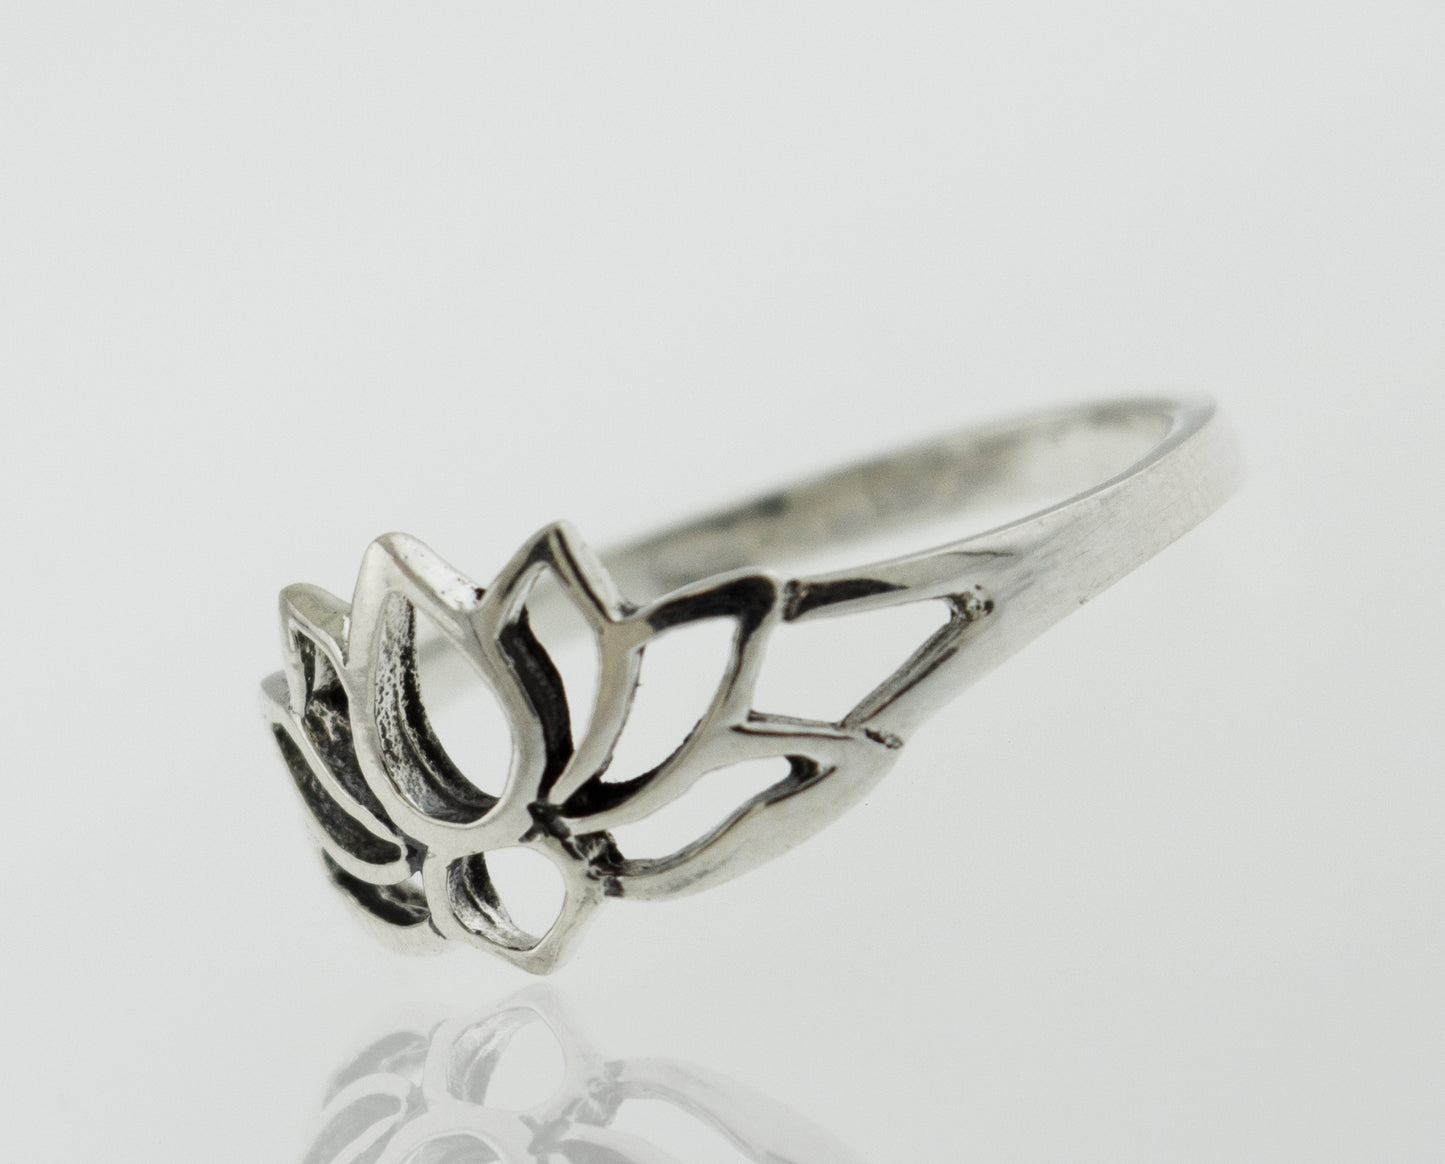 A Delicate Lotus Outline Ring with a lotus flower design, inspired by nature's beauty.